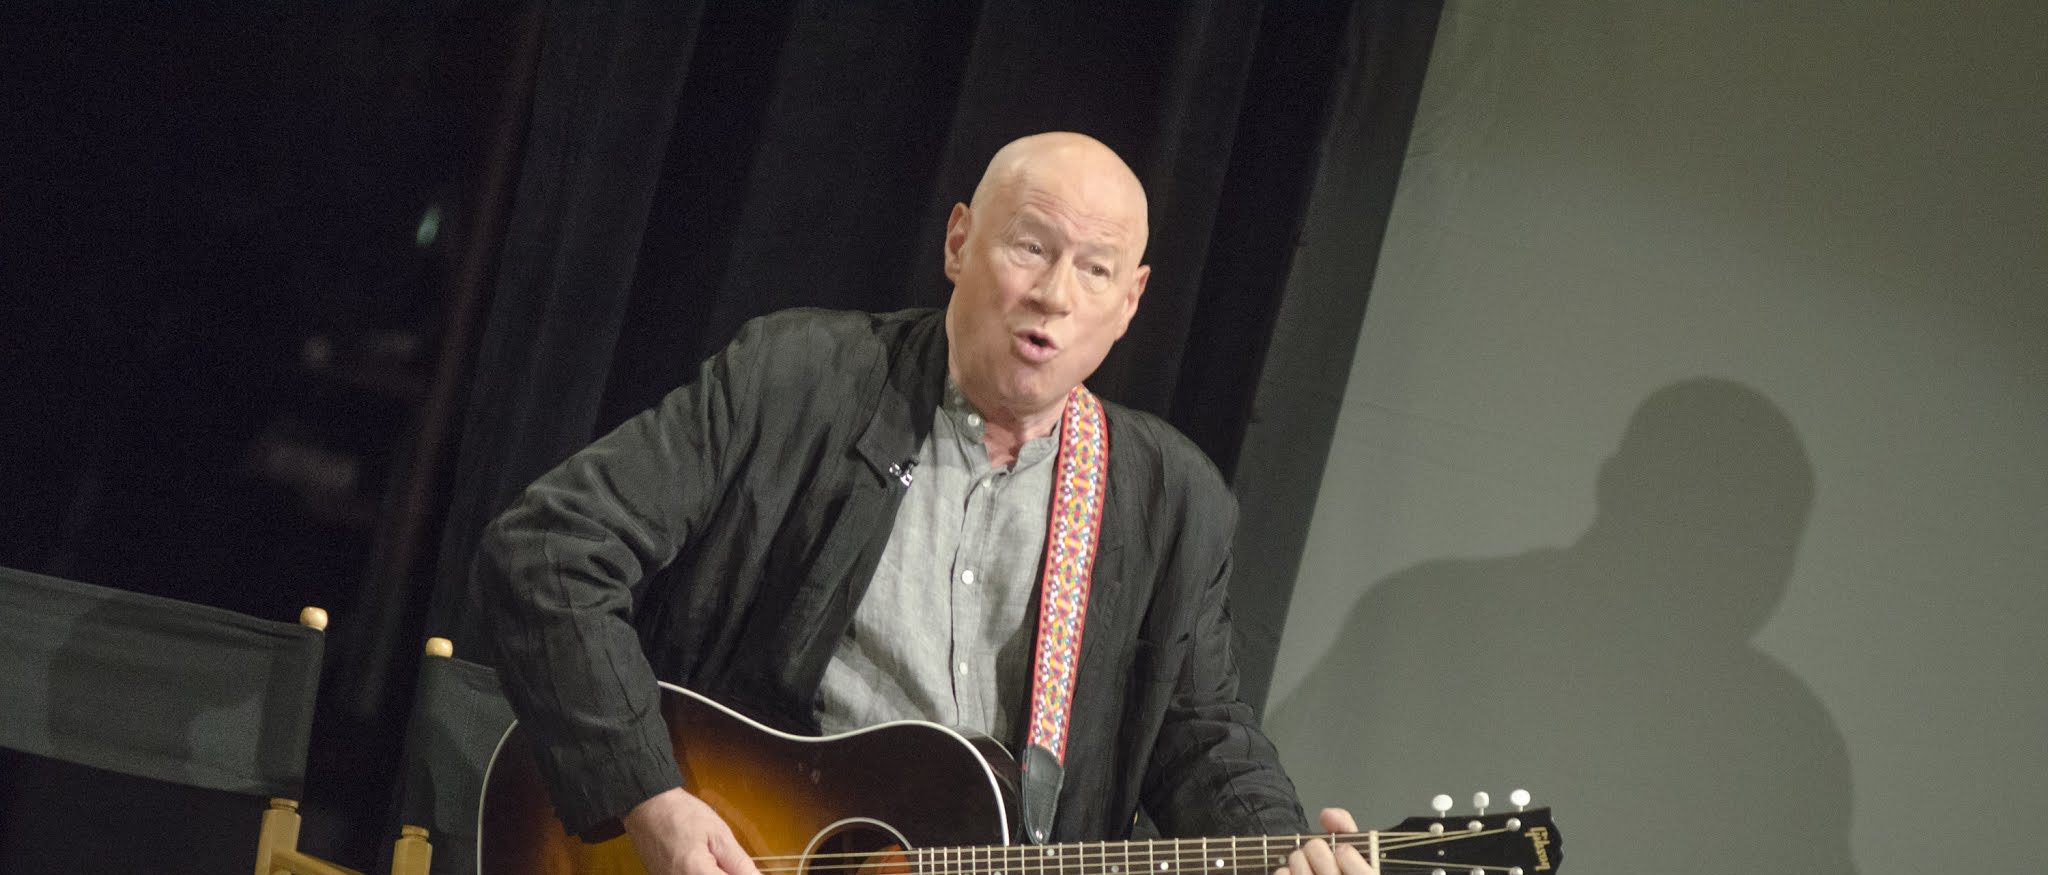 Neil Innes, ‘Monty Python’ Songwriter, Dead At 75 Years Old | The Daily Caller2048 x 875